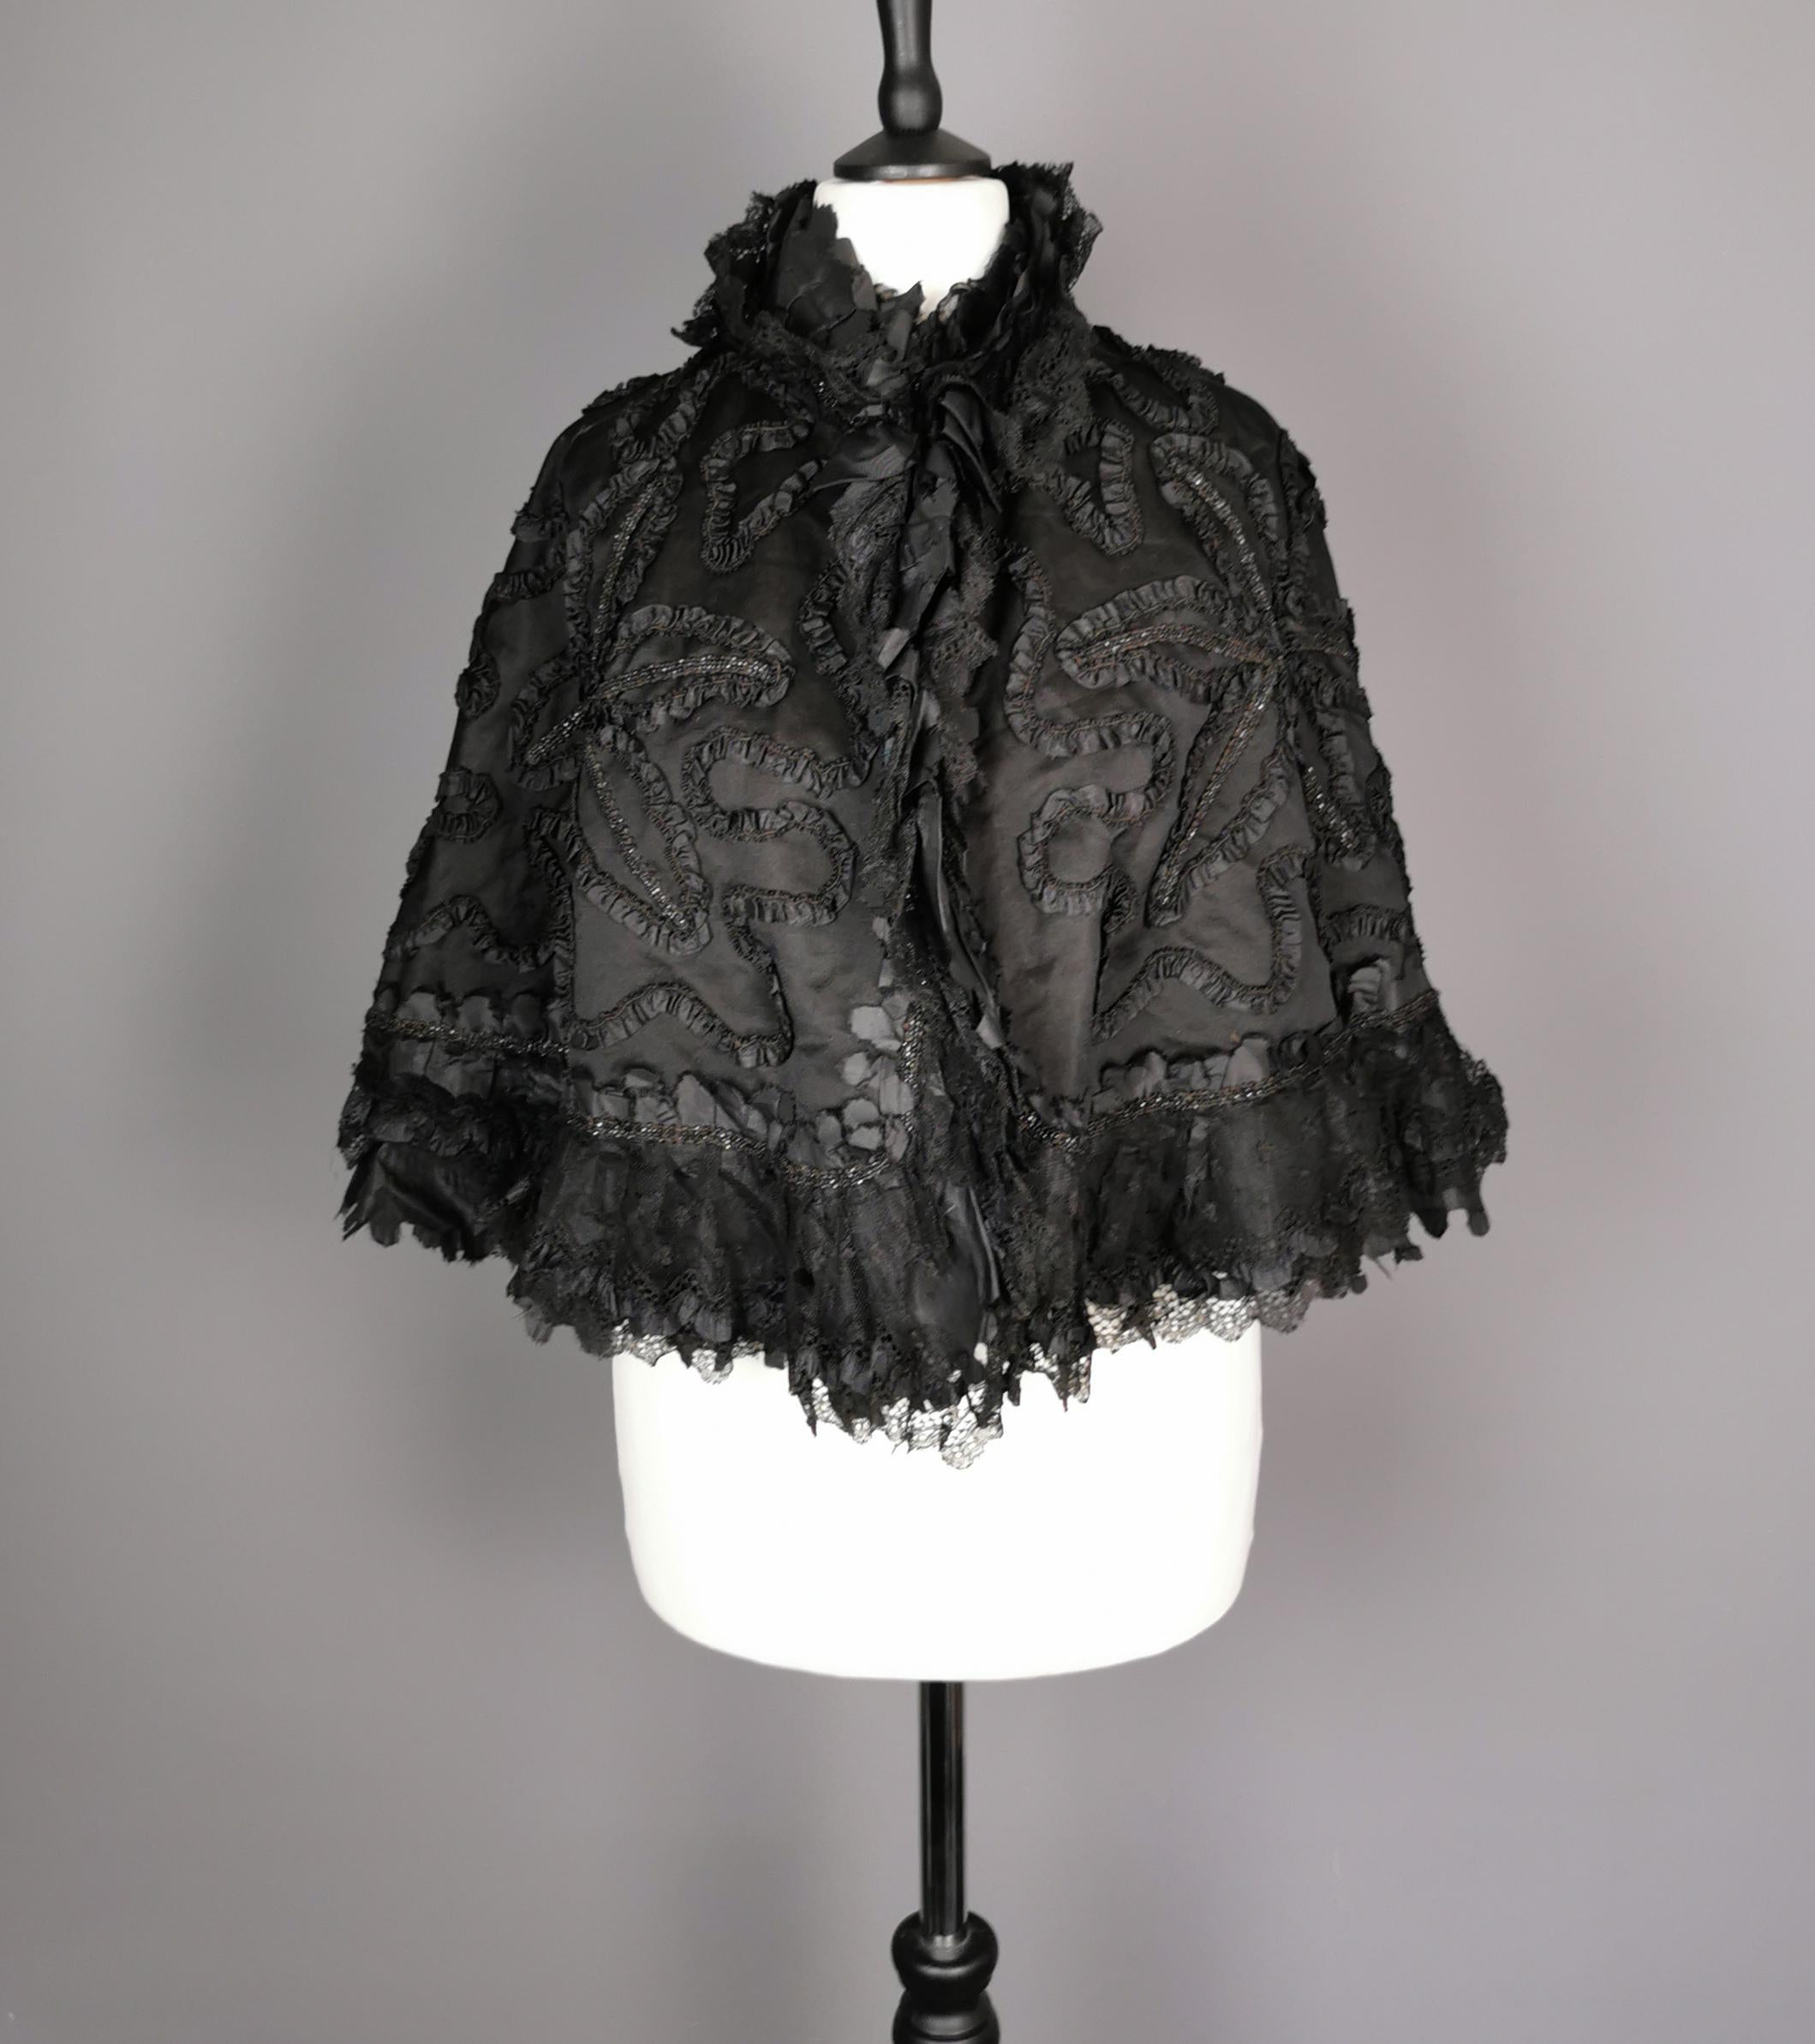 An absolutely beautiful Victorian mourning Cape with French jet beaded embellishments, and a silk swirl design trimmed in black lace.

The main outer of the cape is made in a black taffeta with a swirl design in black silk and the interior is lined